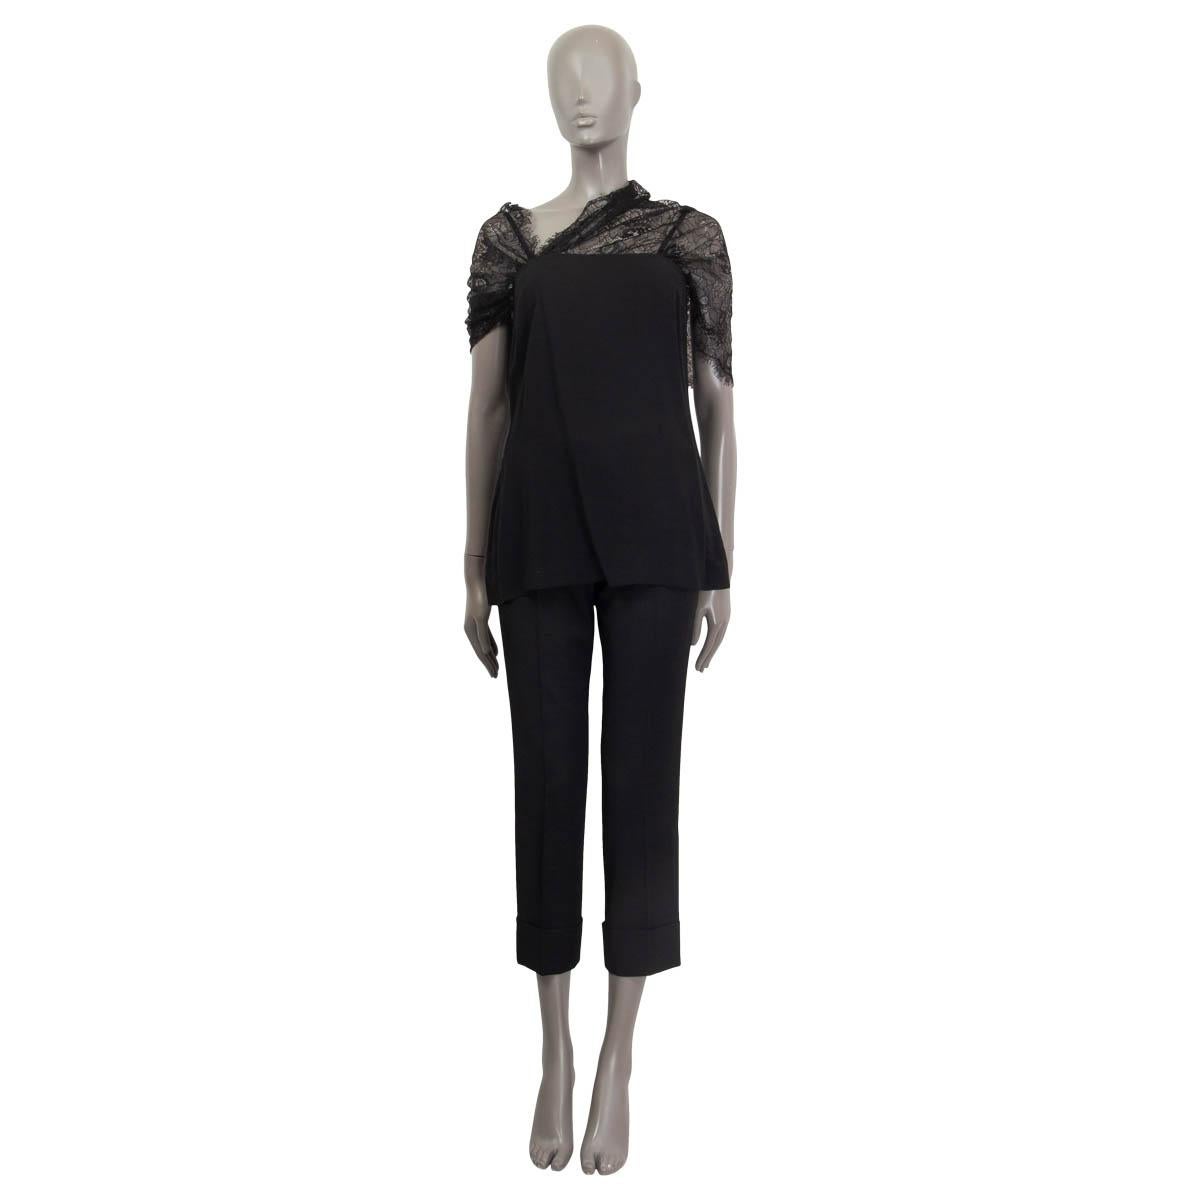 100% authentic Prada short sleeve shirt in black viscose (98%) and elastane (2%). Features a sheer lace collar that can be worn as halter neck or over the shoulder. Opens with a concealed zipper and a hook on the back. Unlined. Has been worn and is